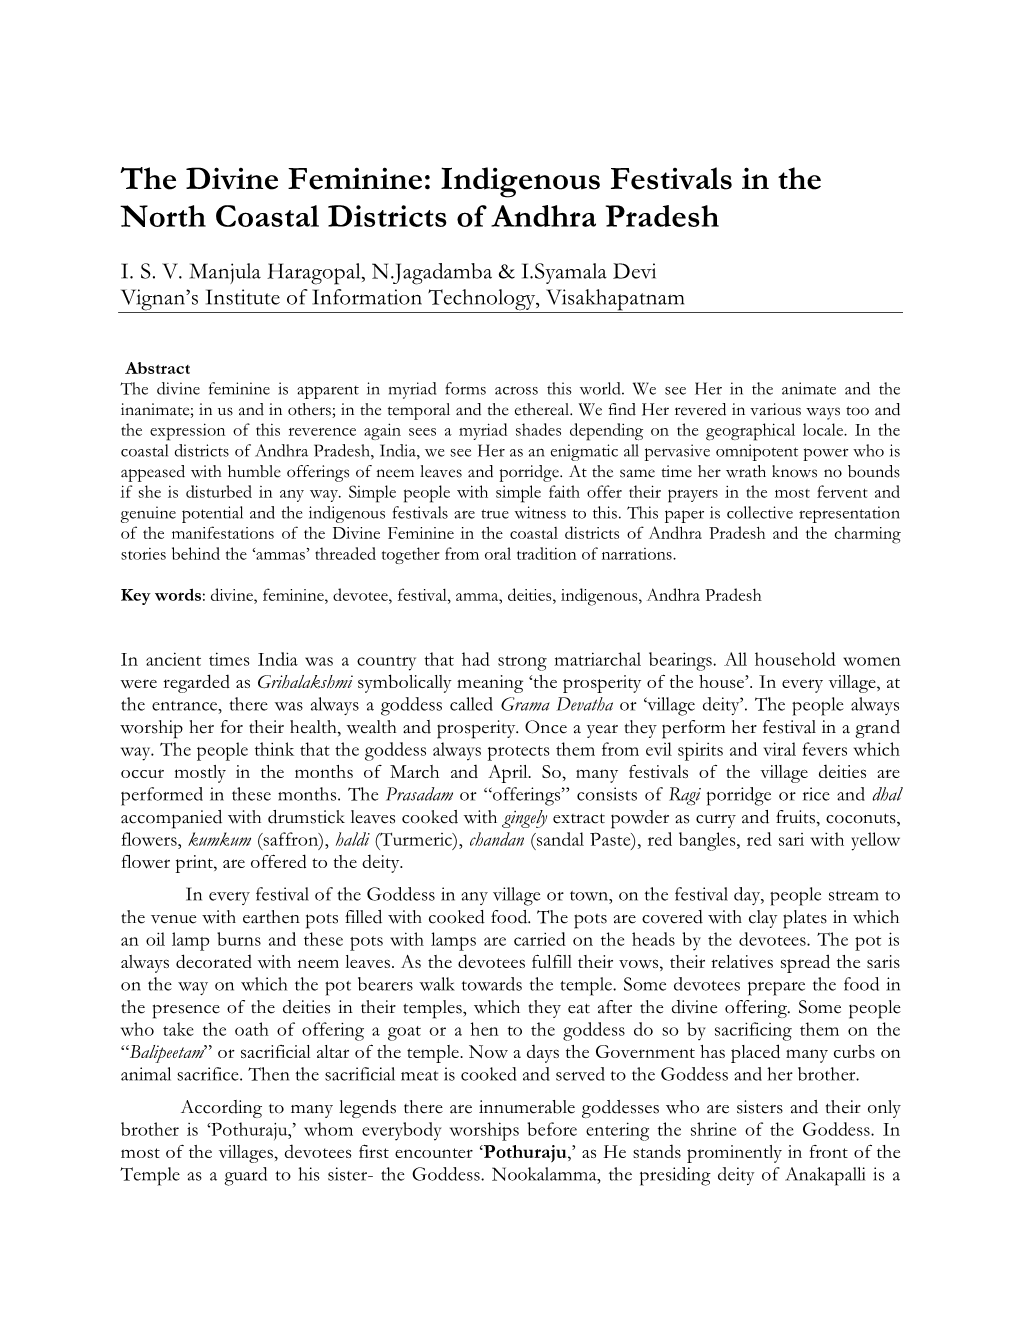 The Divine Feminine: Indigenous Festivals in the North Coastal Districts of Andhra Pradesh